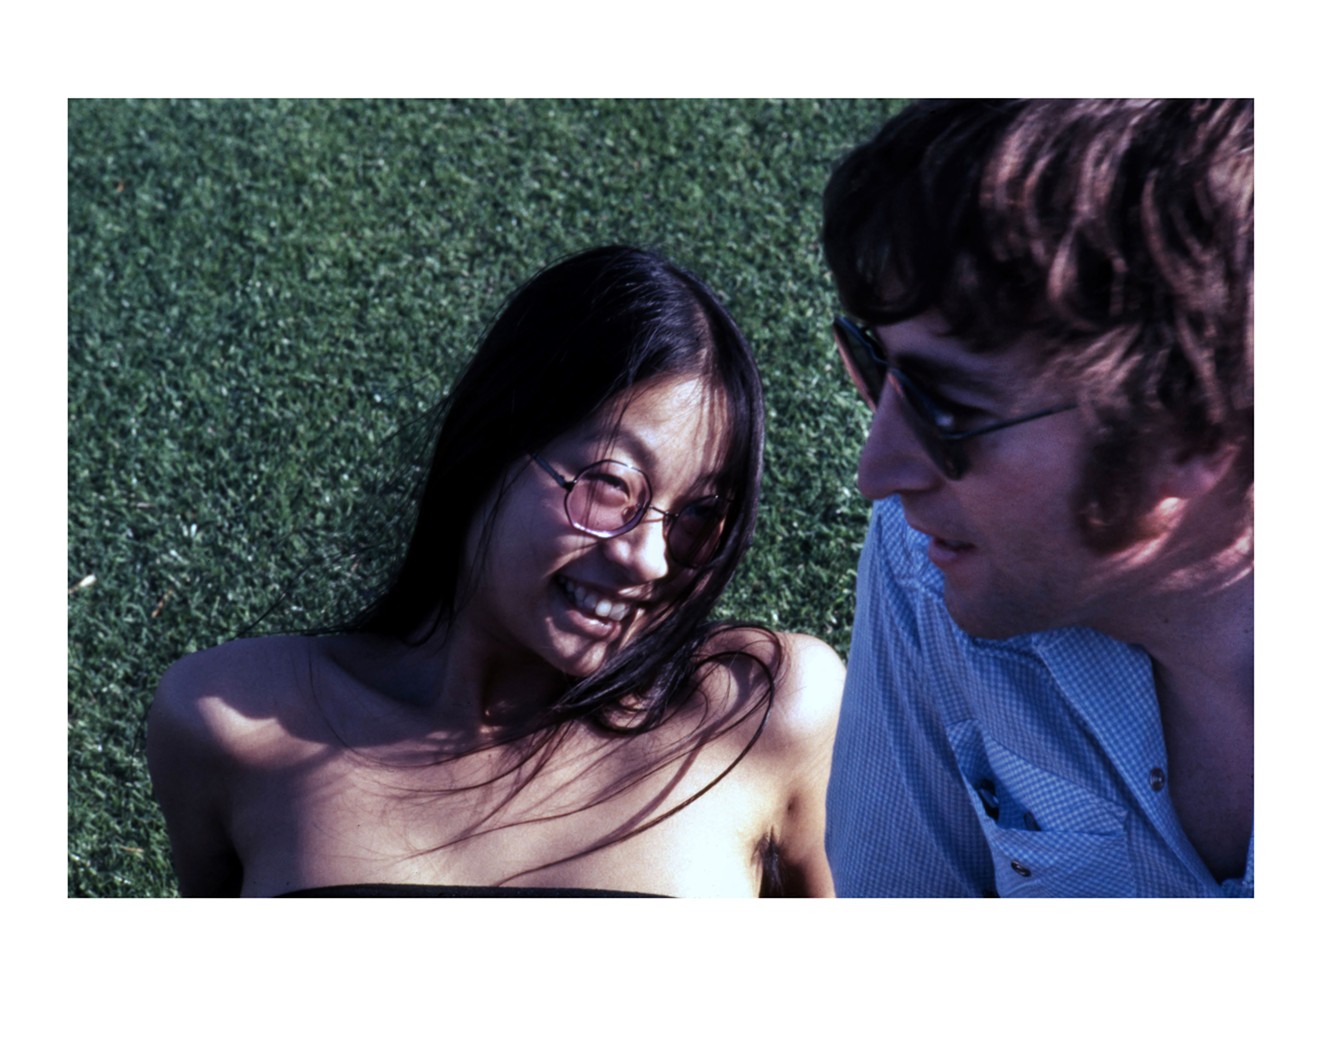 May Pang and John Lennon, in a photo captured by Harry Nilsson.